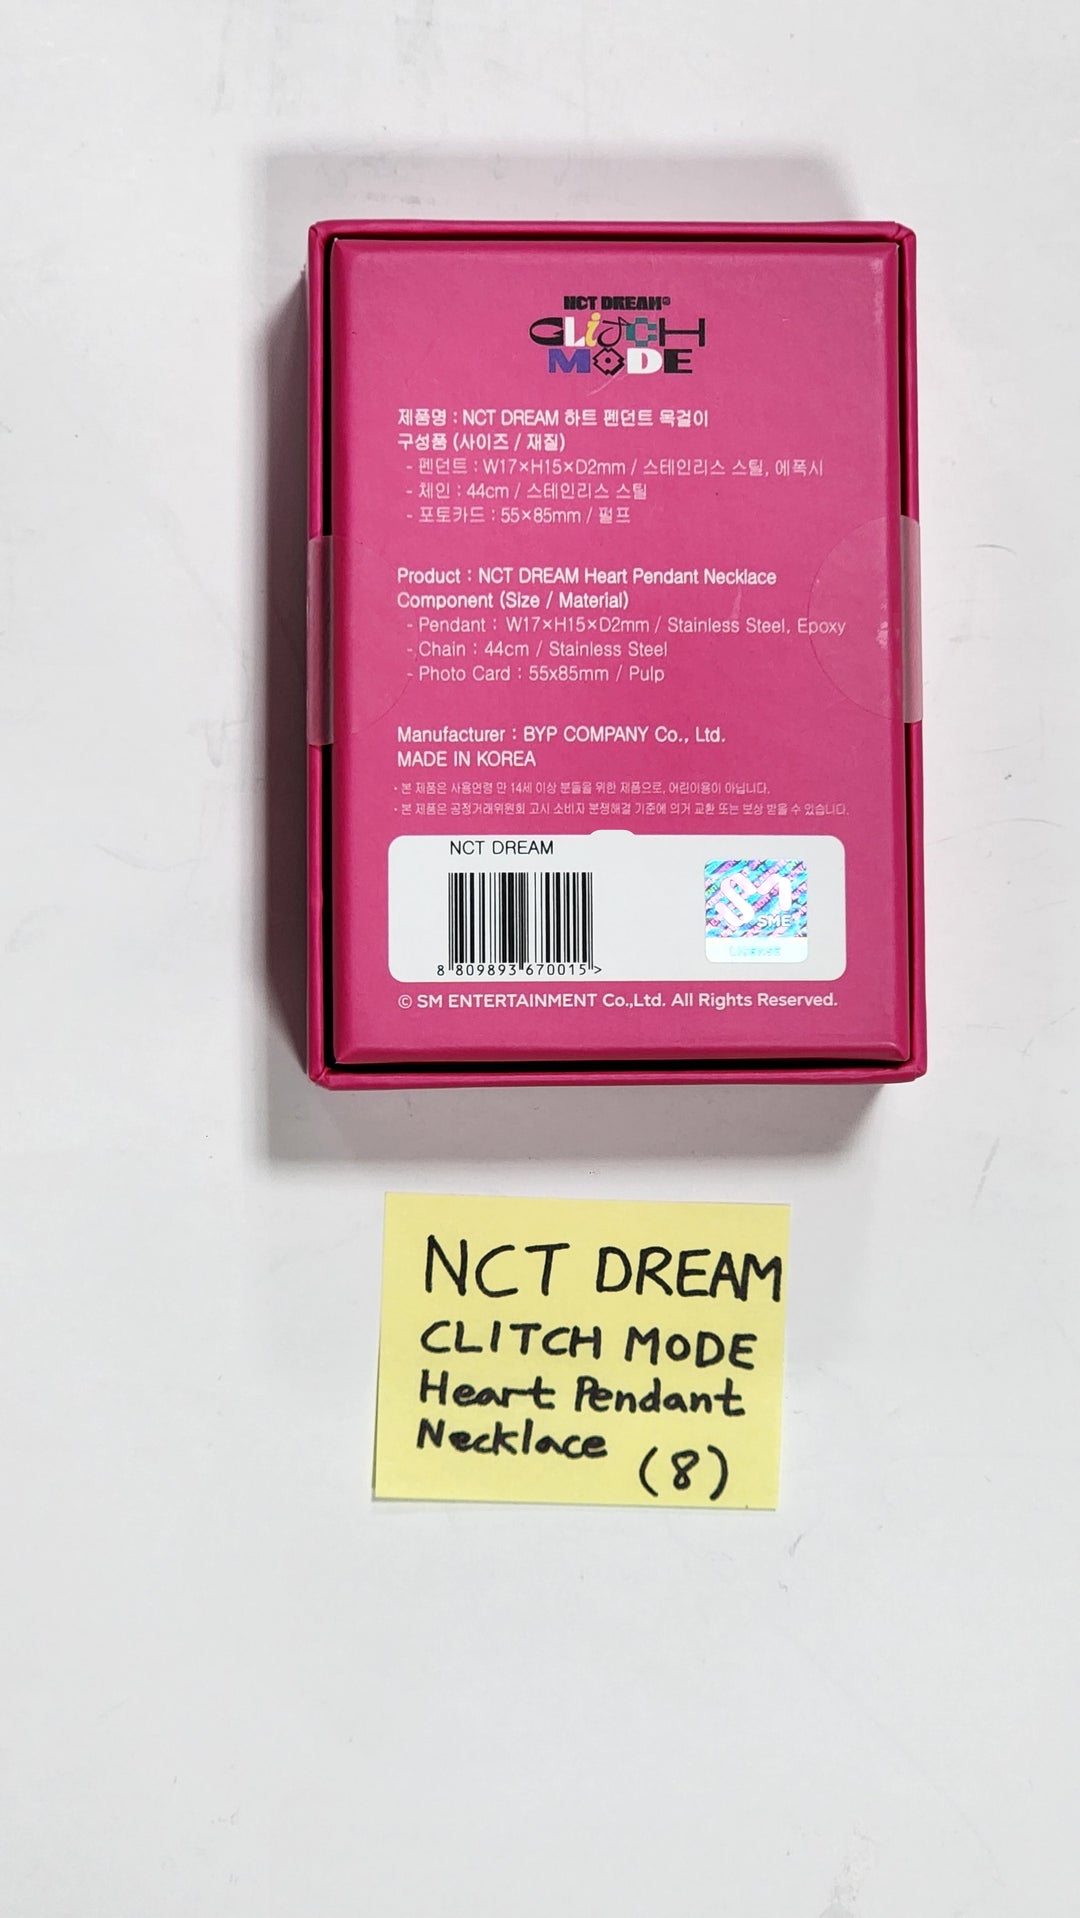 NCT Dream 'Glitch Mode' - Heart Pendant Necklace (New / Sealed)